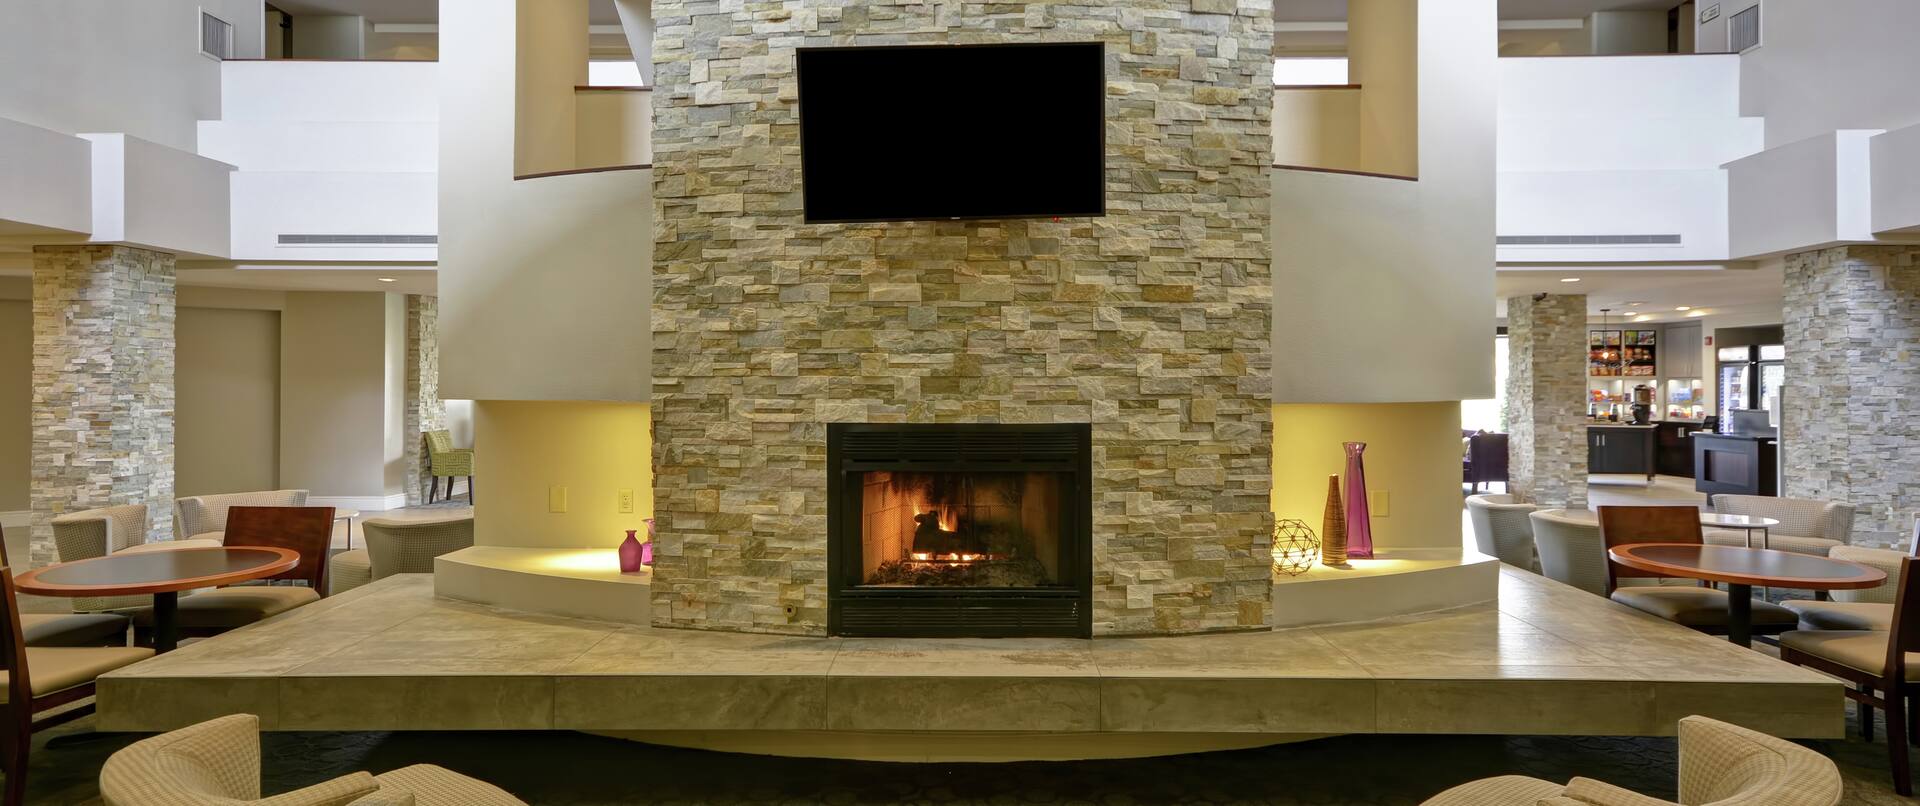 Lobby Fireplace Seating